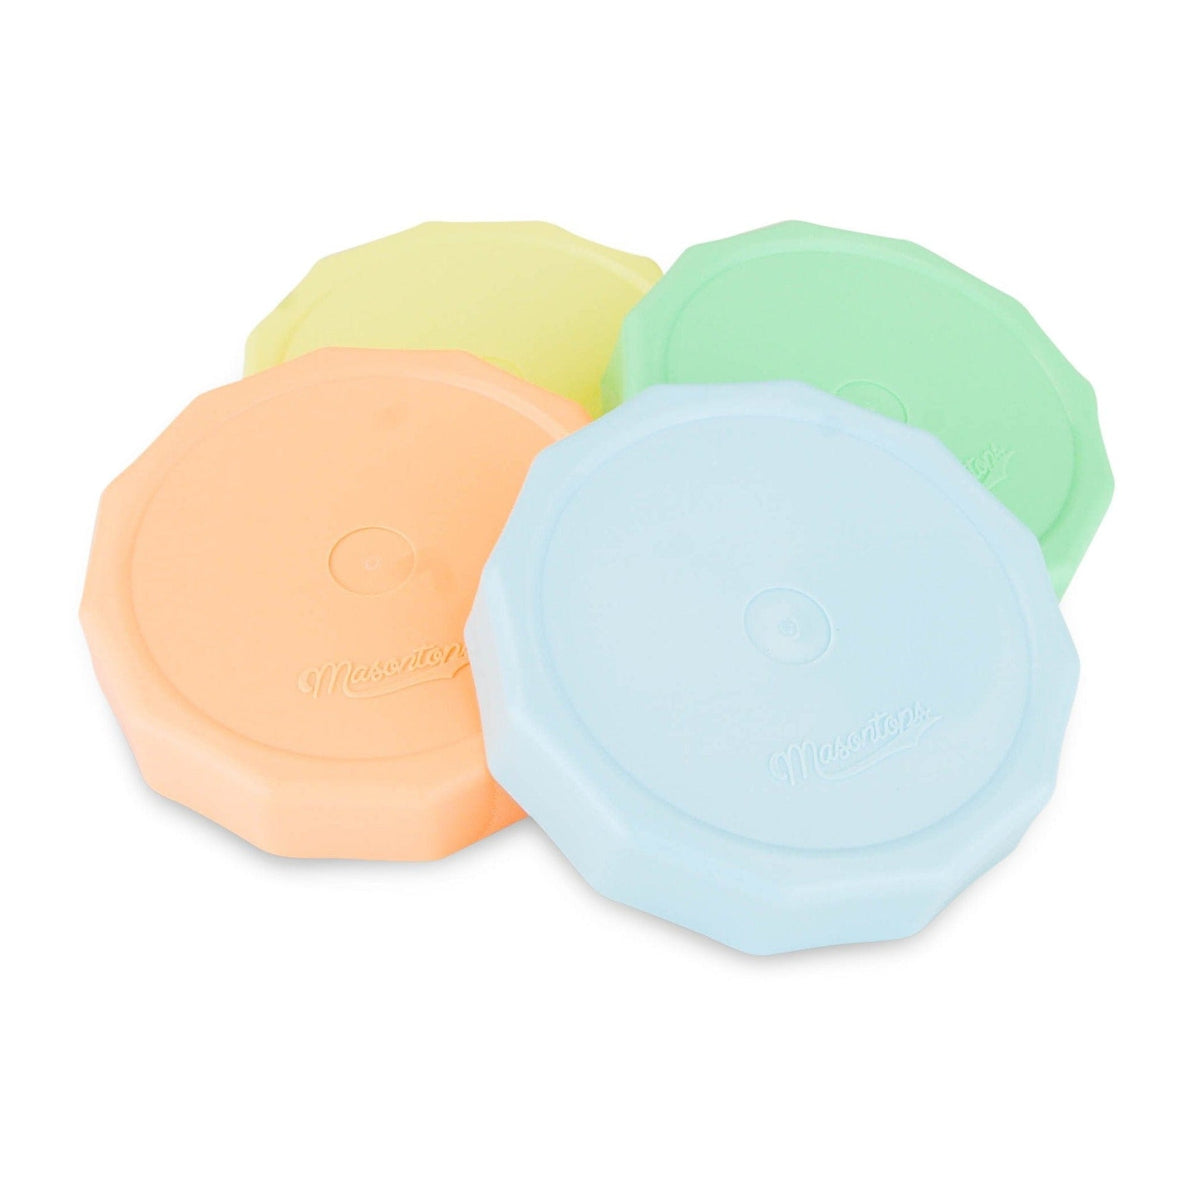 Photo of the Tough Tops Solid Lid in green, blue, orange and yellow. Photographed against a white background.